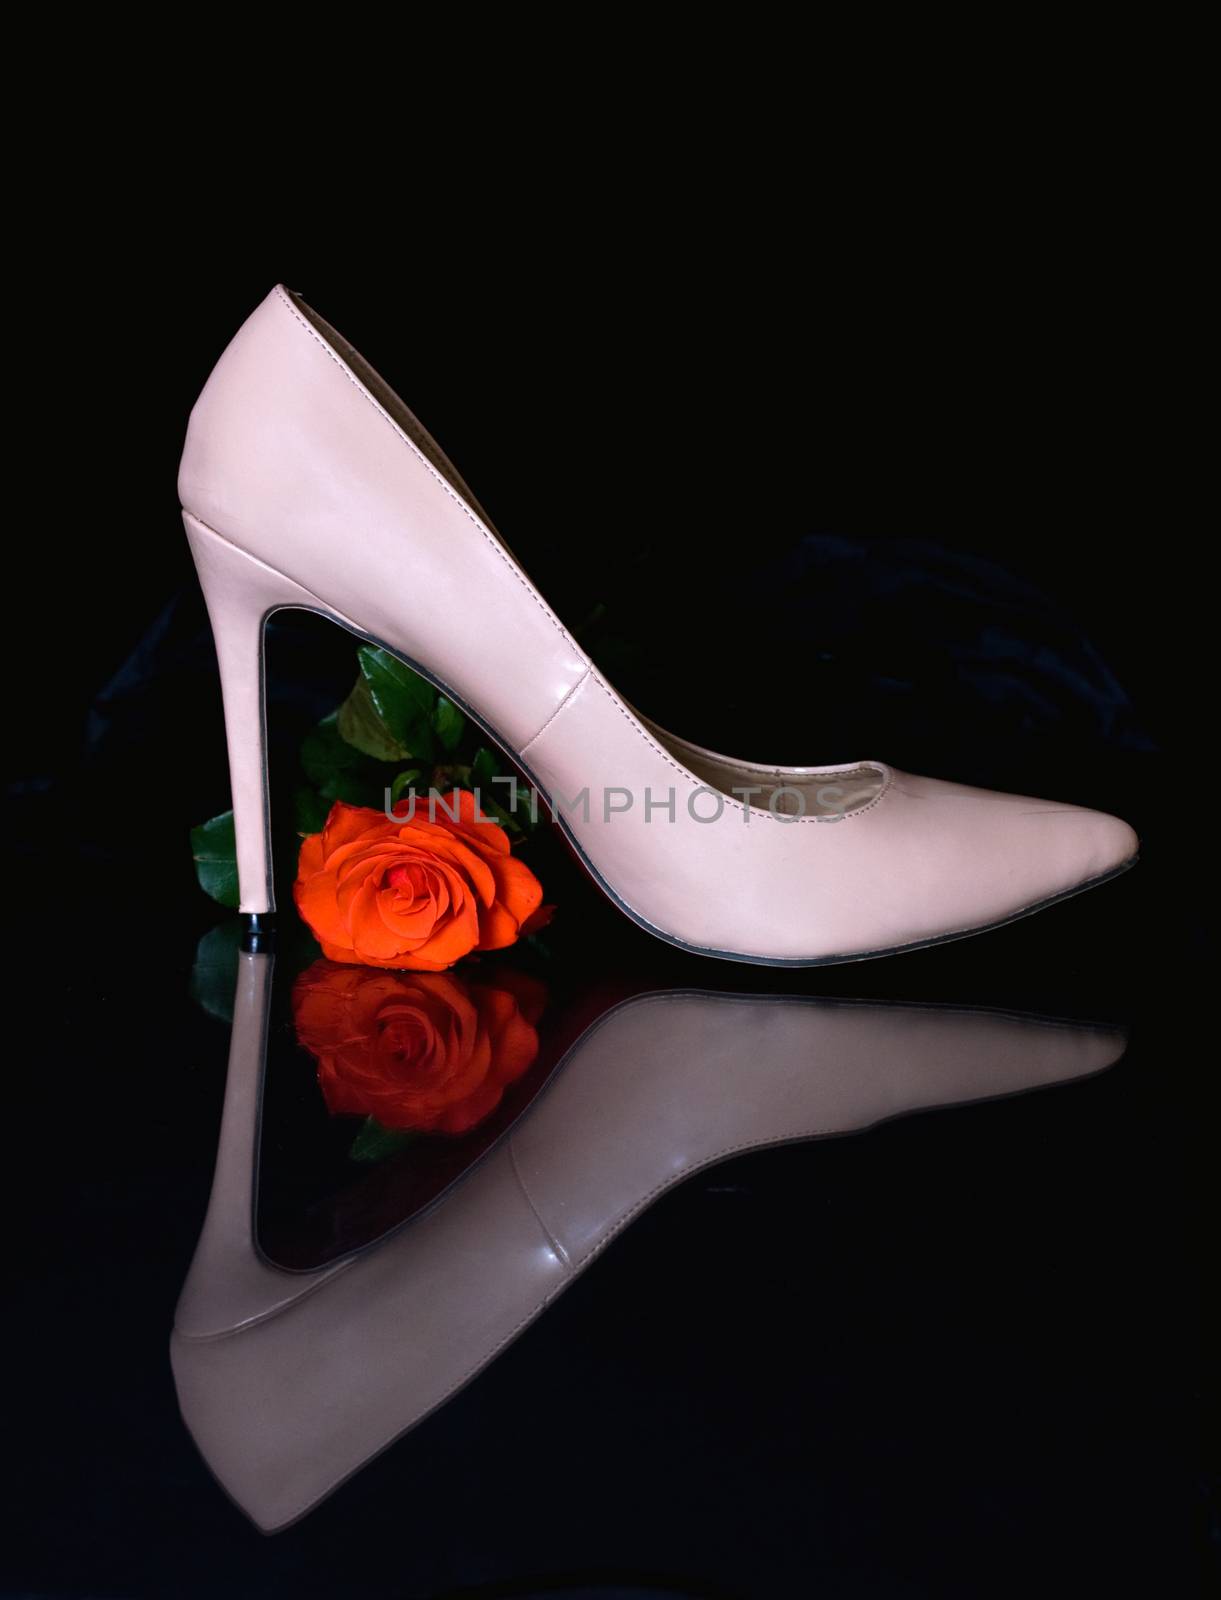 Shoe and rose by Irina1977